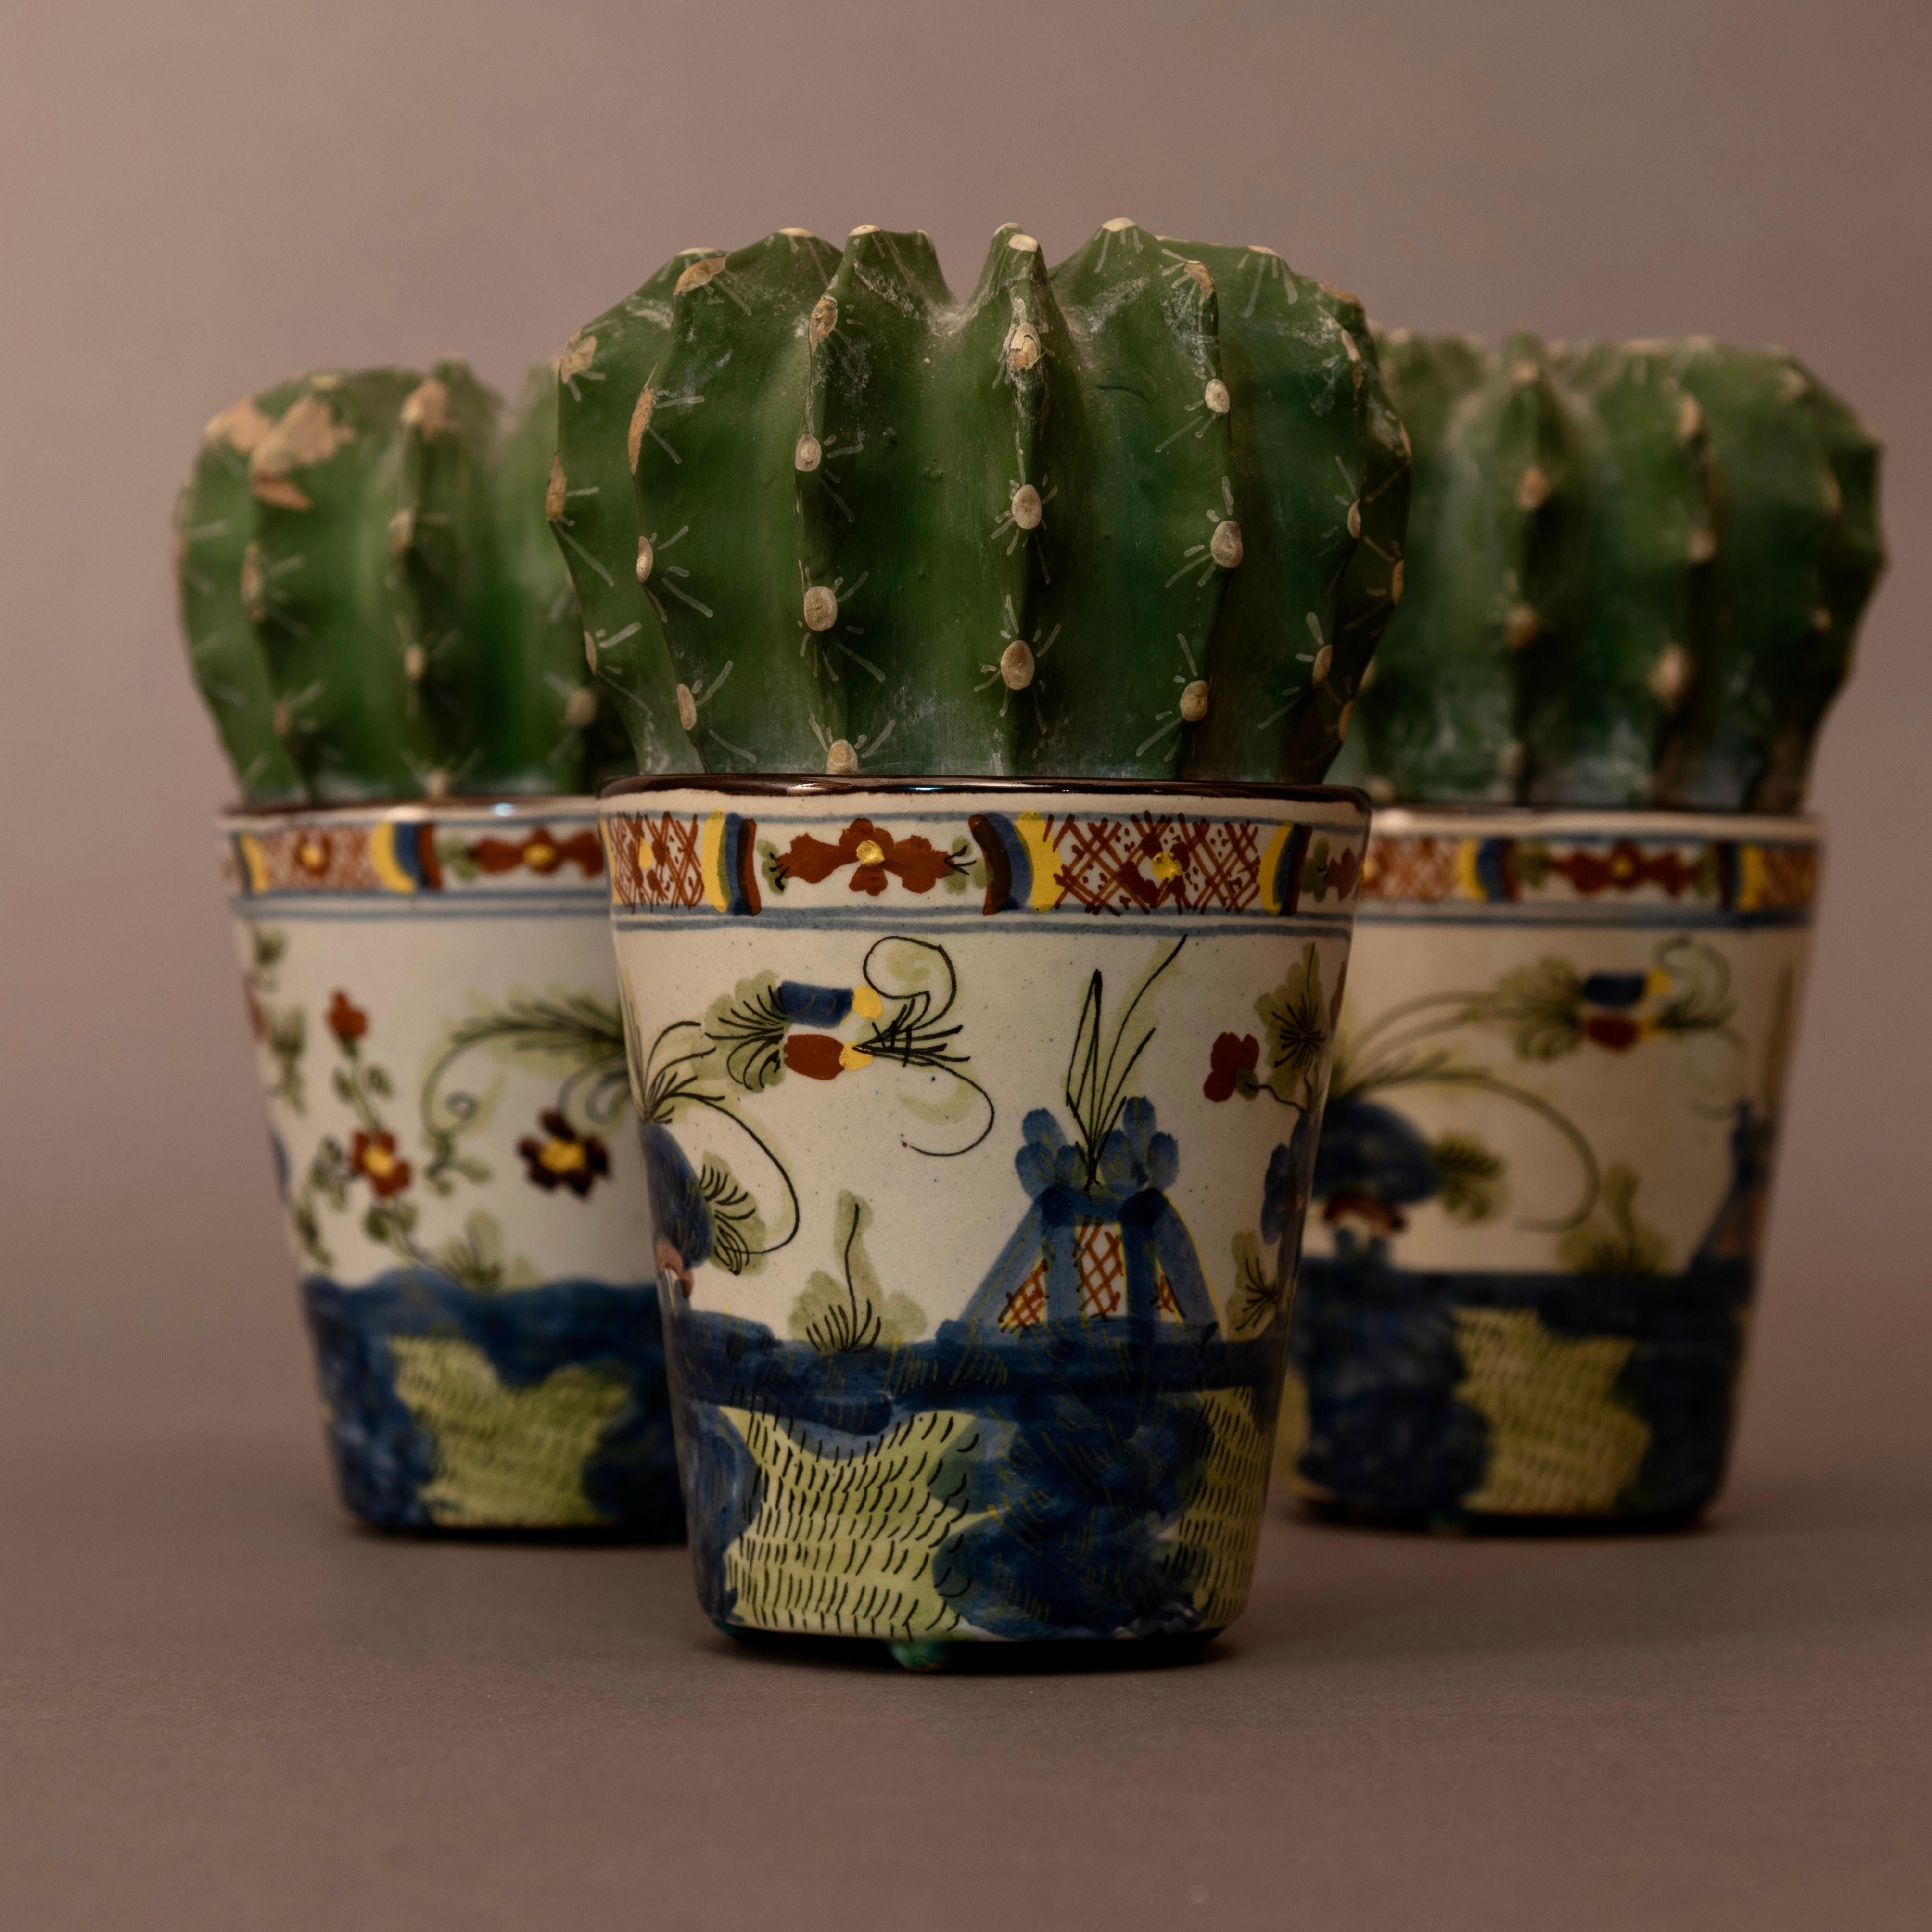 Beautiful set of Faenza ceramics from the 1950s.
They represent a subject as original as interesting: cactus plants placed inside a ceramic vase!
These small masterpieces are the work of an important Italian ceramics factory: 